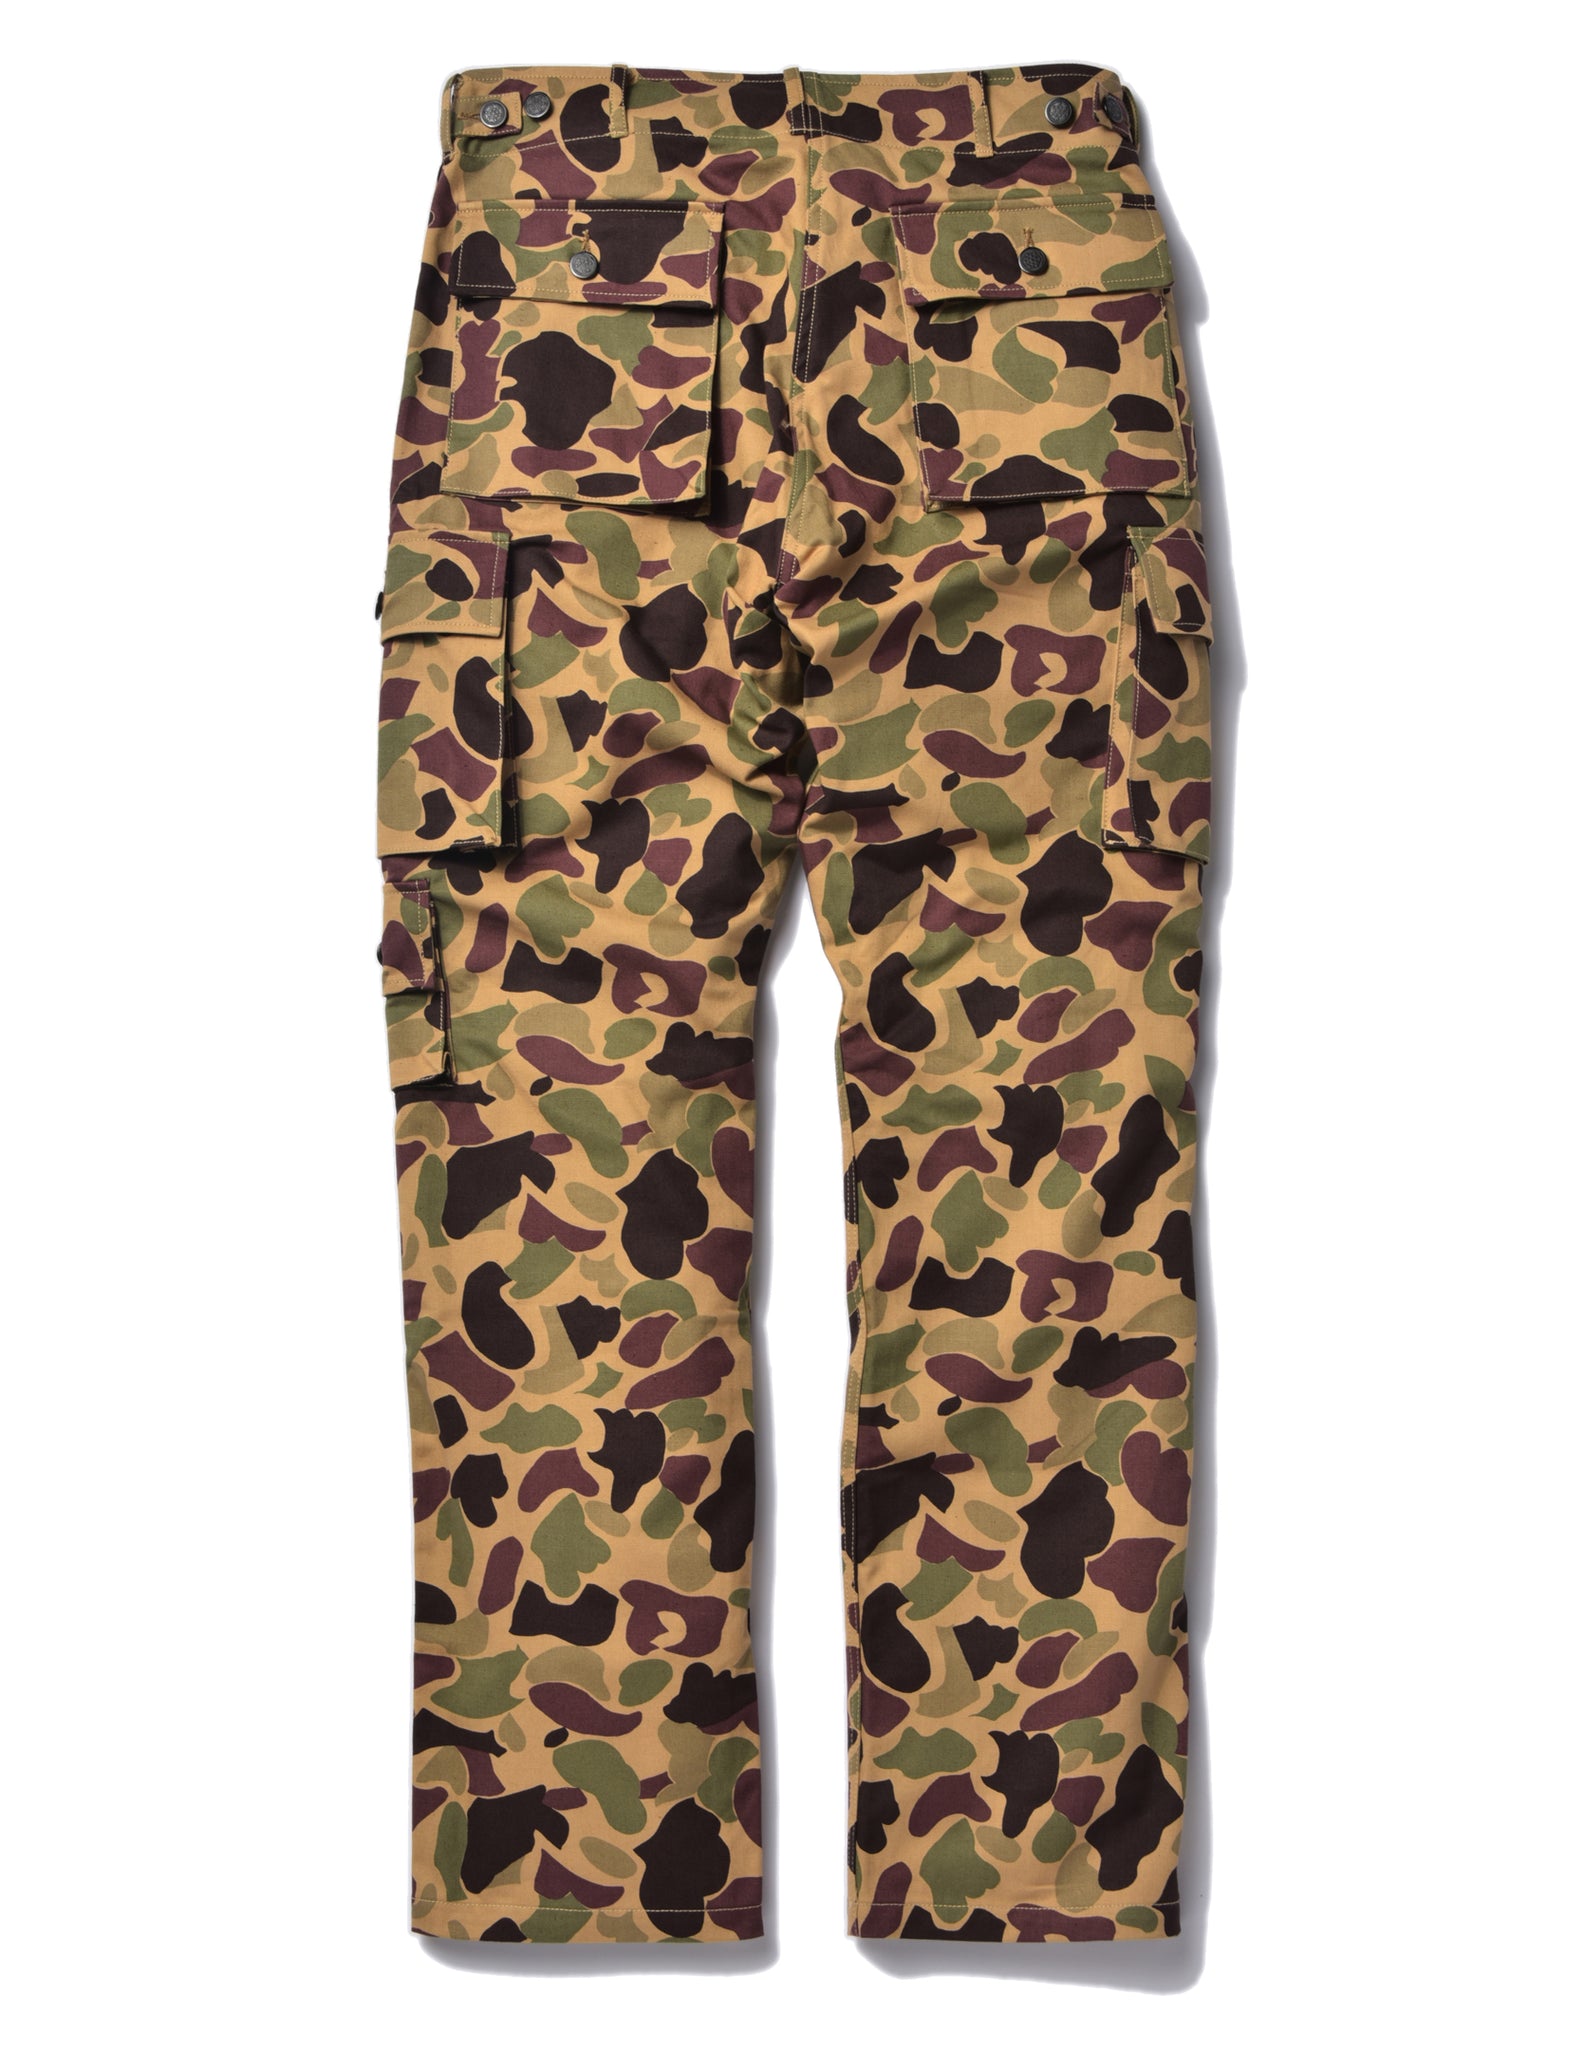 BEO GAM CAMOUFLAGE TROUSERS